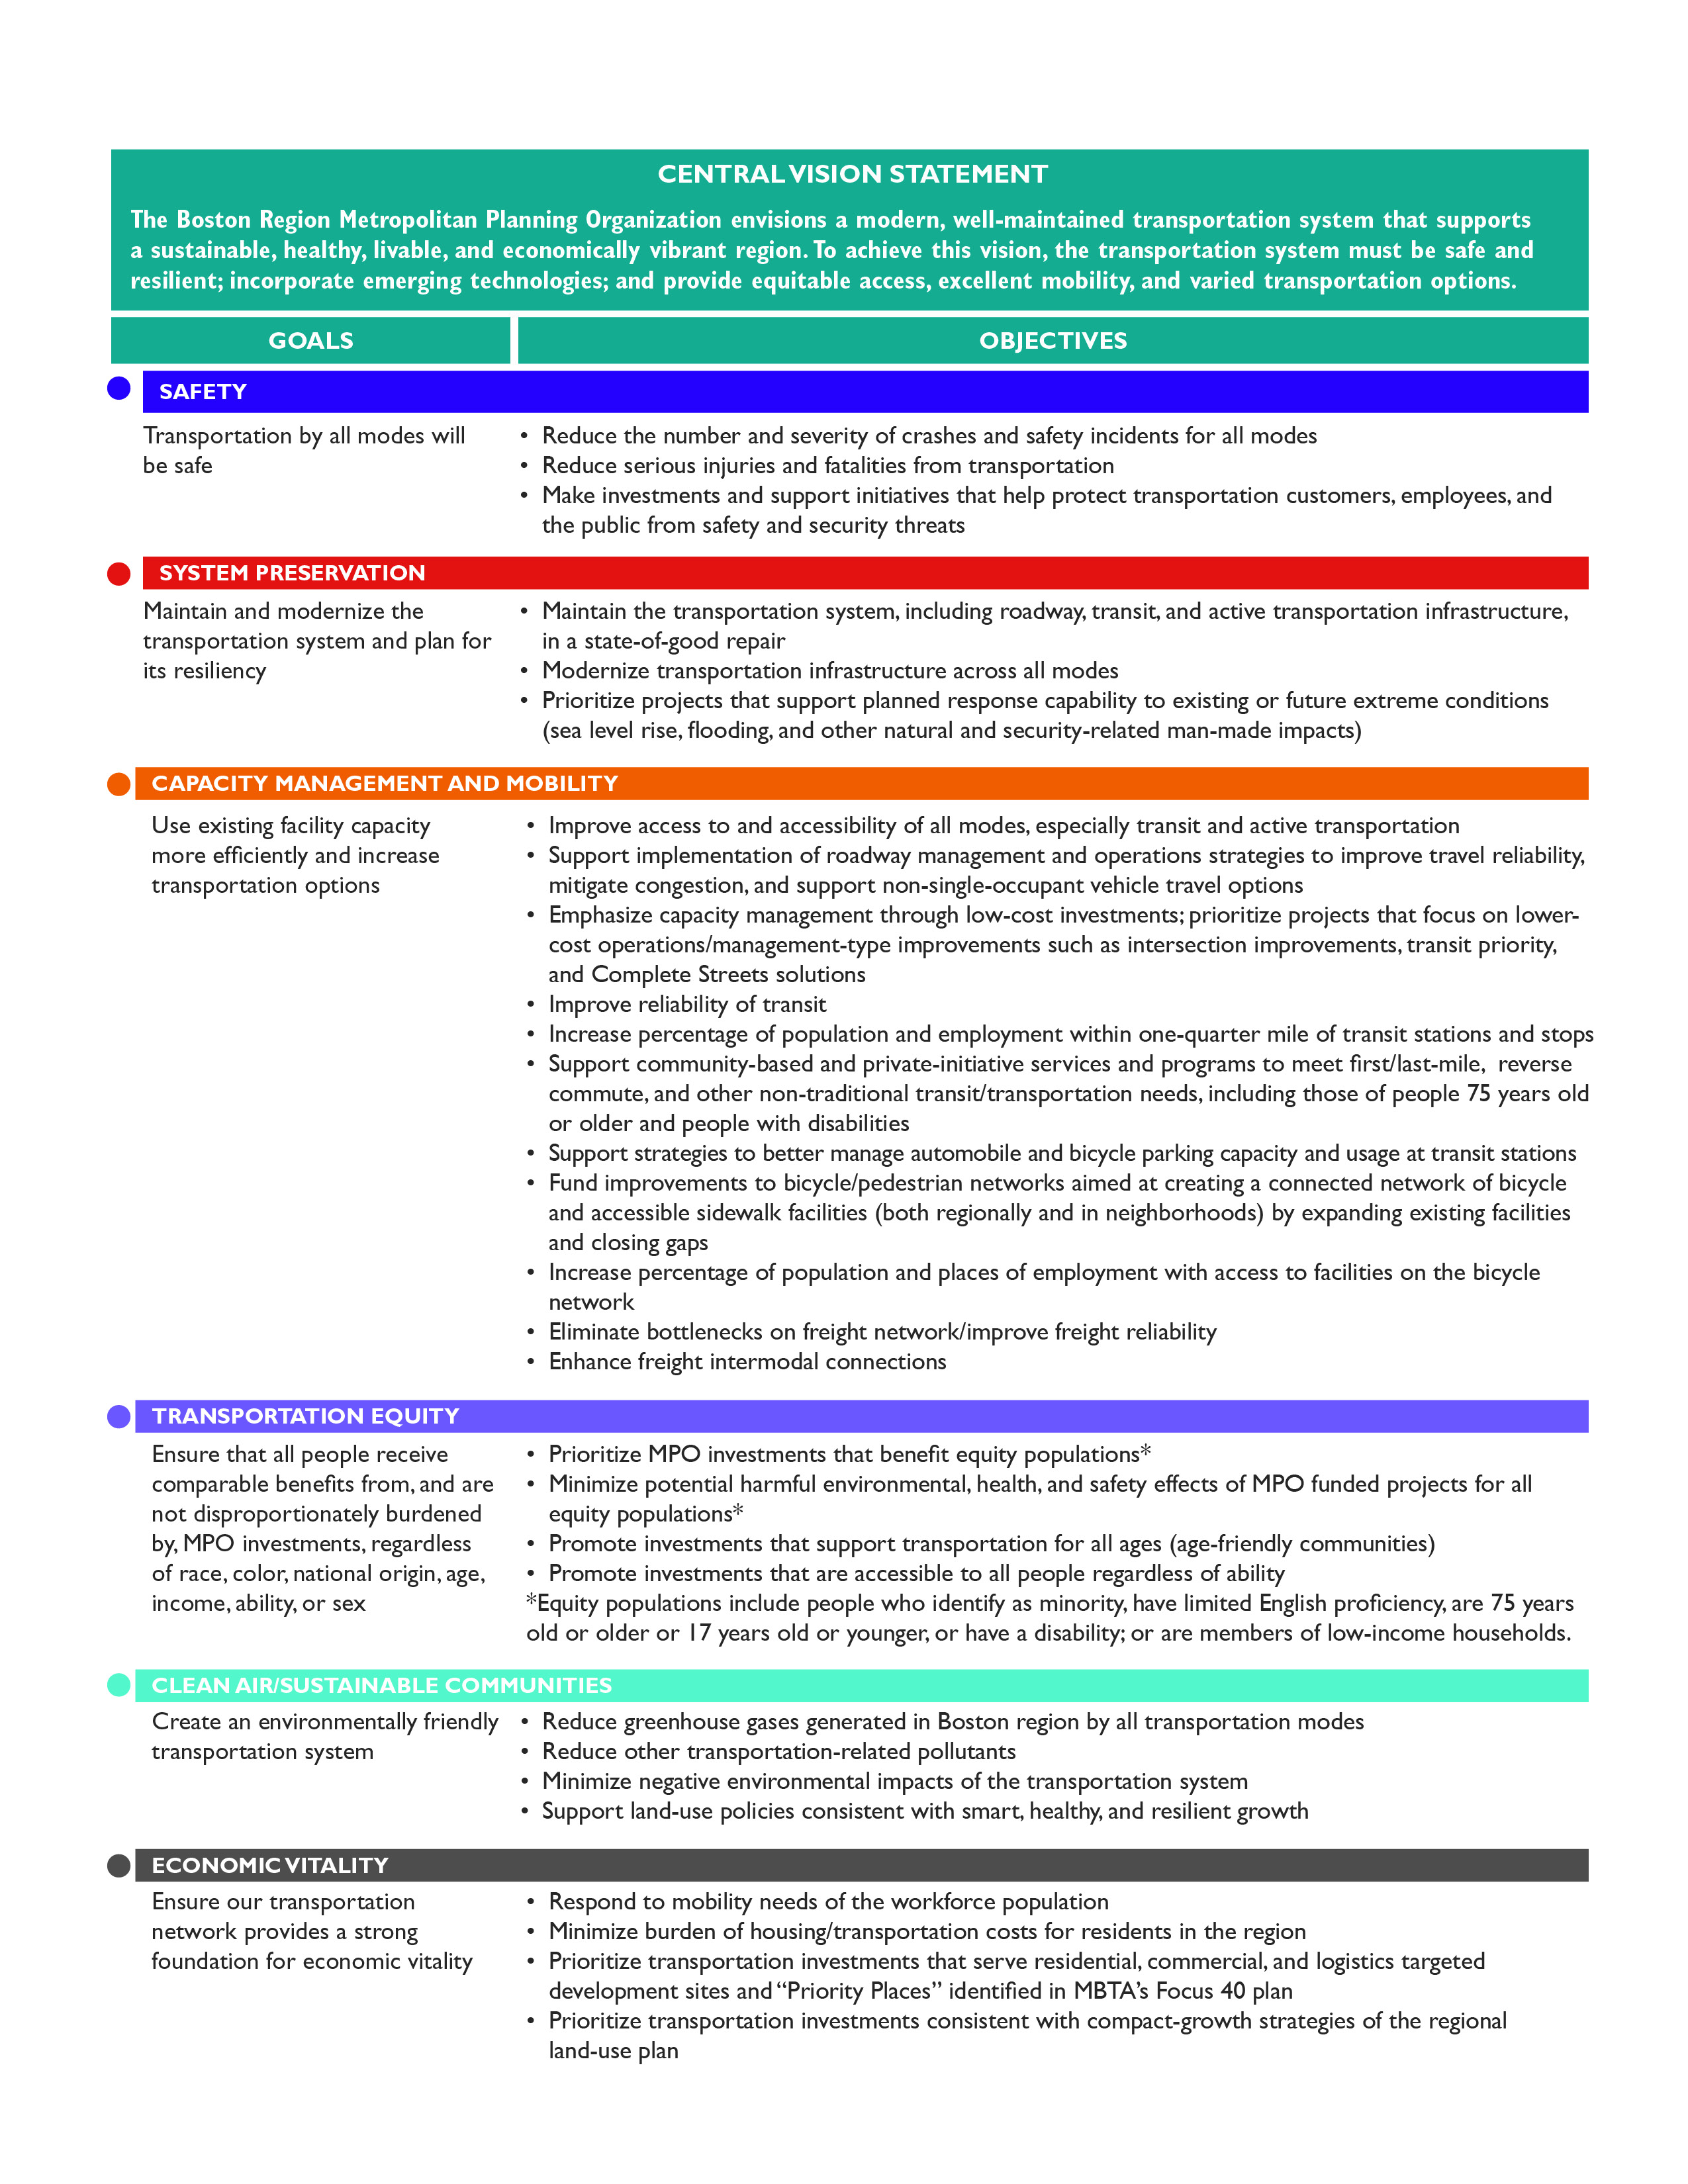 Figure 1-3. LRTP Goals and Objectives, as of Spring 2019
Figure 1-3 is a text table that cites the vision of the Boston Region MPO, and lists the six goals of the MPO, along with their related objectives. 
